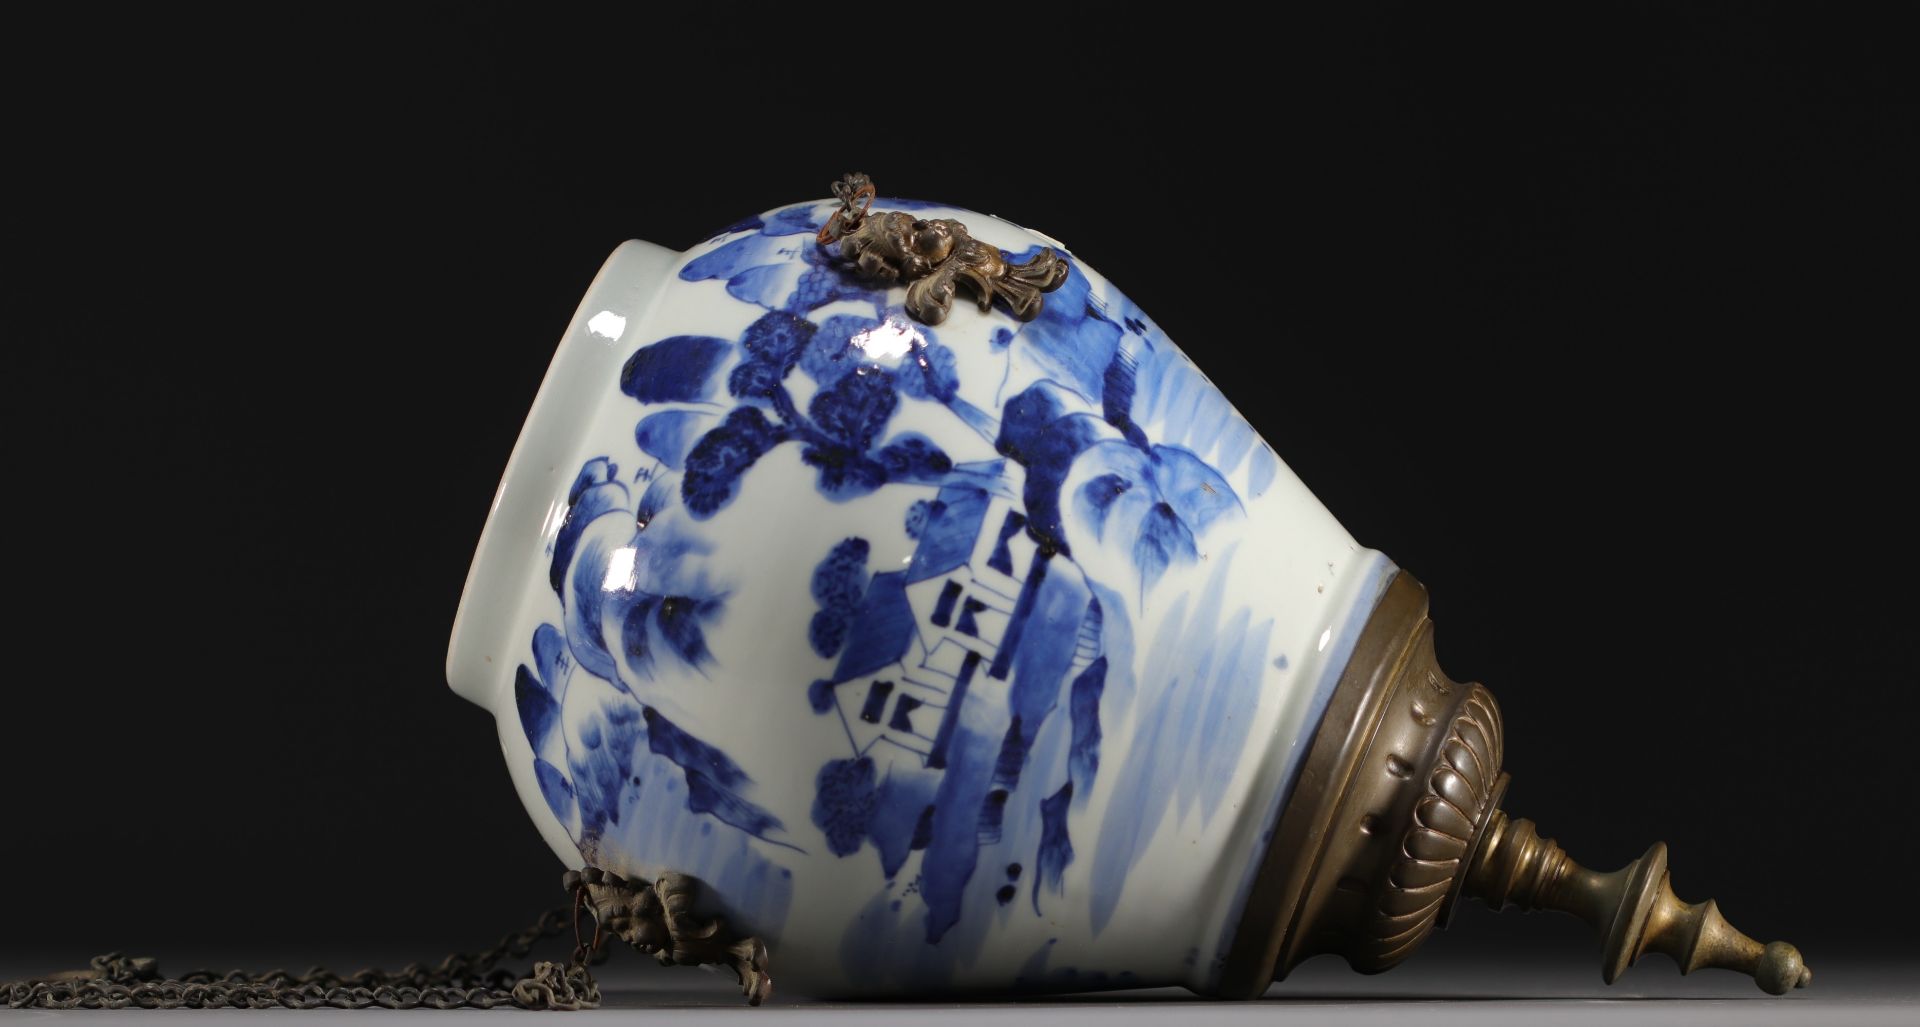 China - Blue and white porcelain vase with landscape design, mounted in a "lantern" shape.